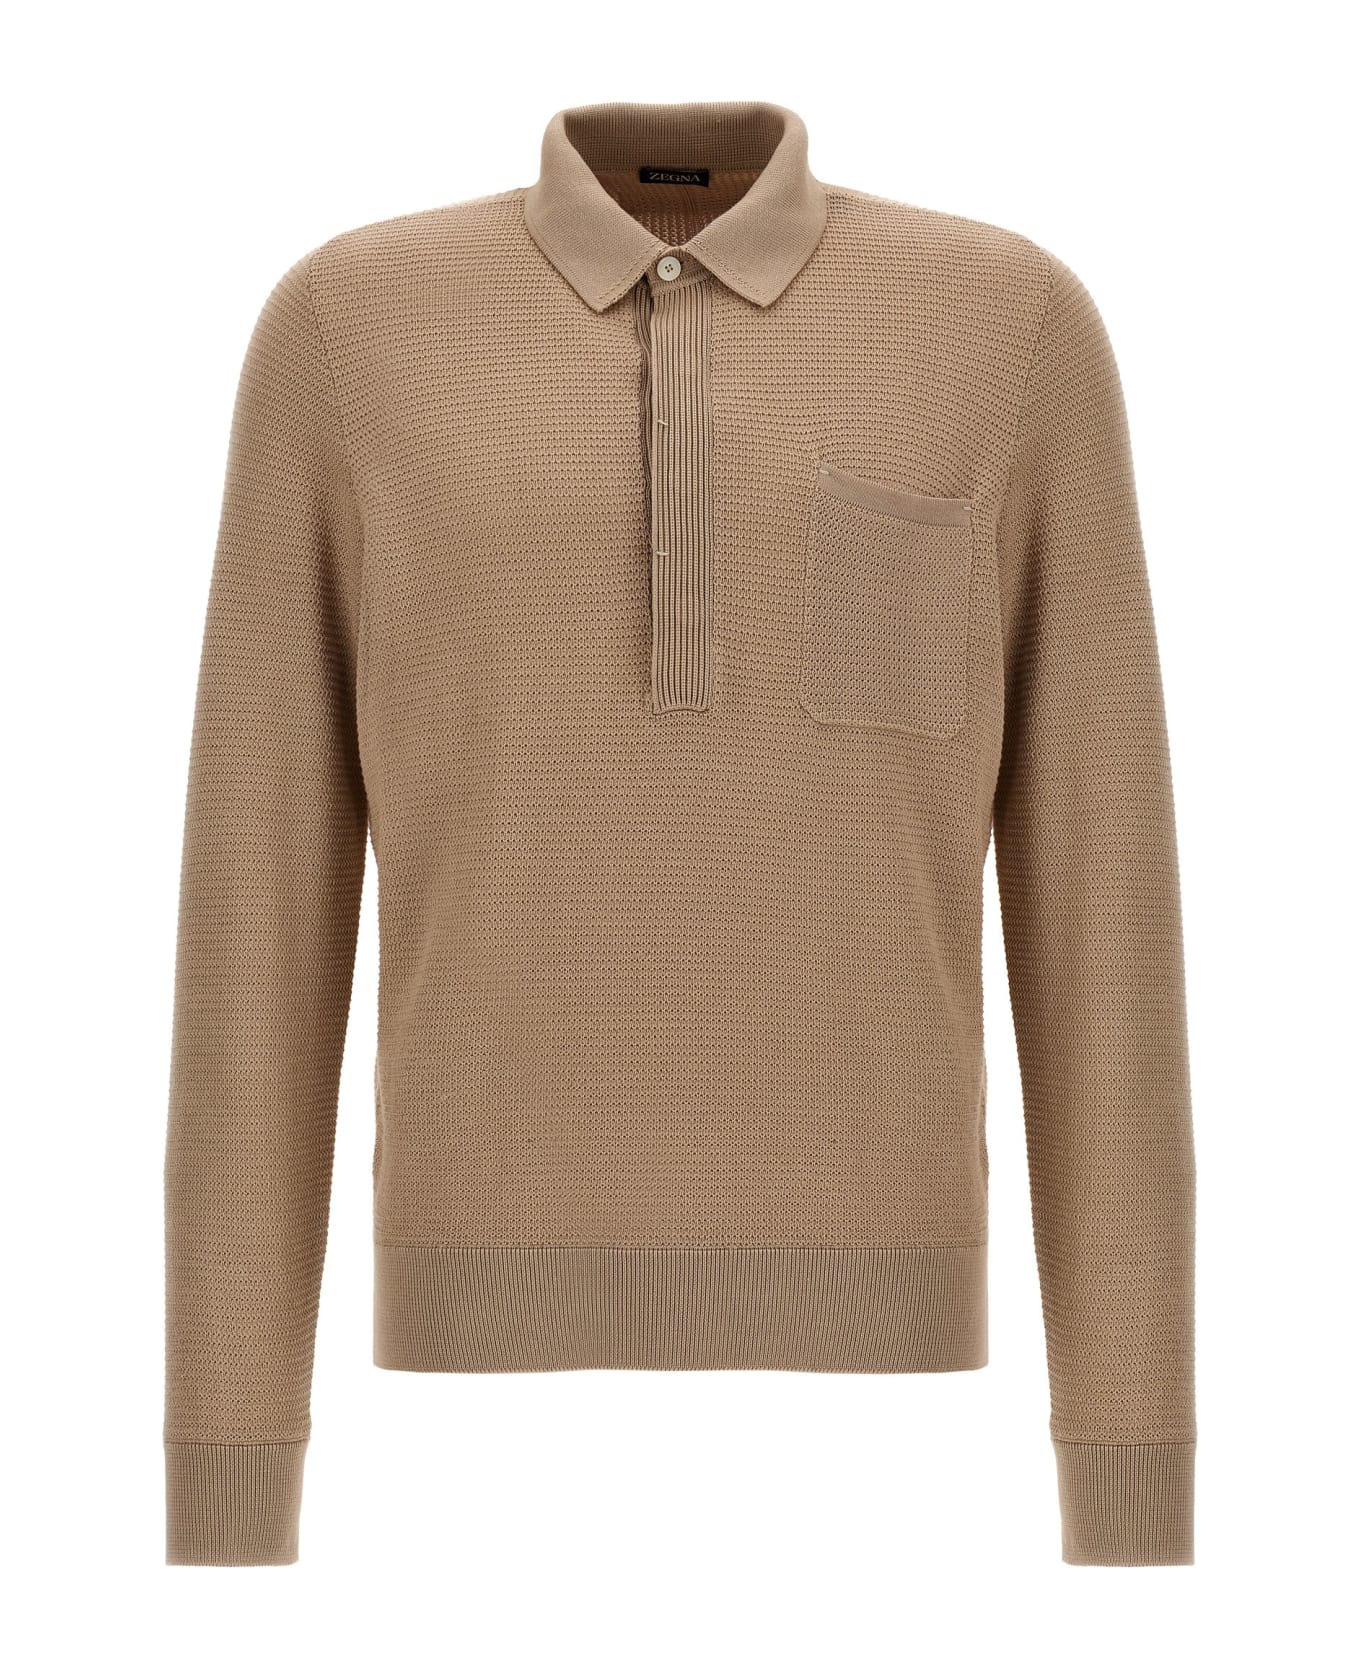 Zegna Knitted Polo Shirt - Beige